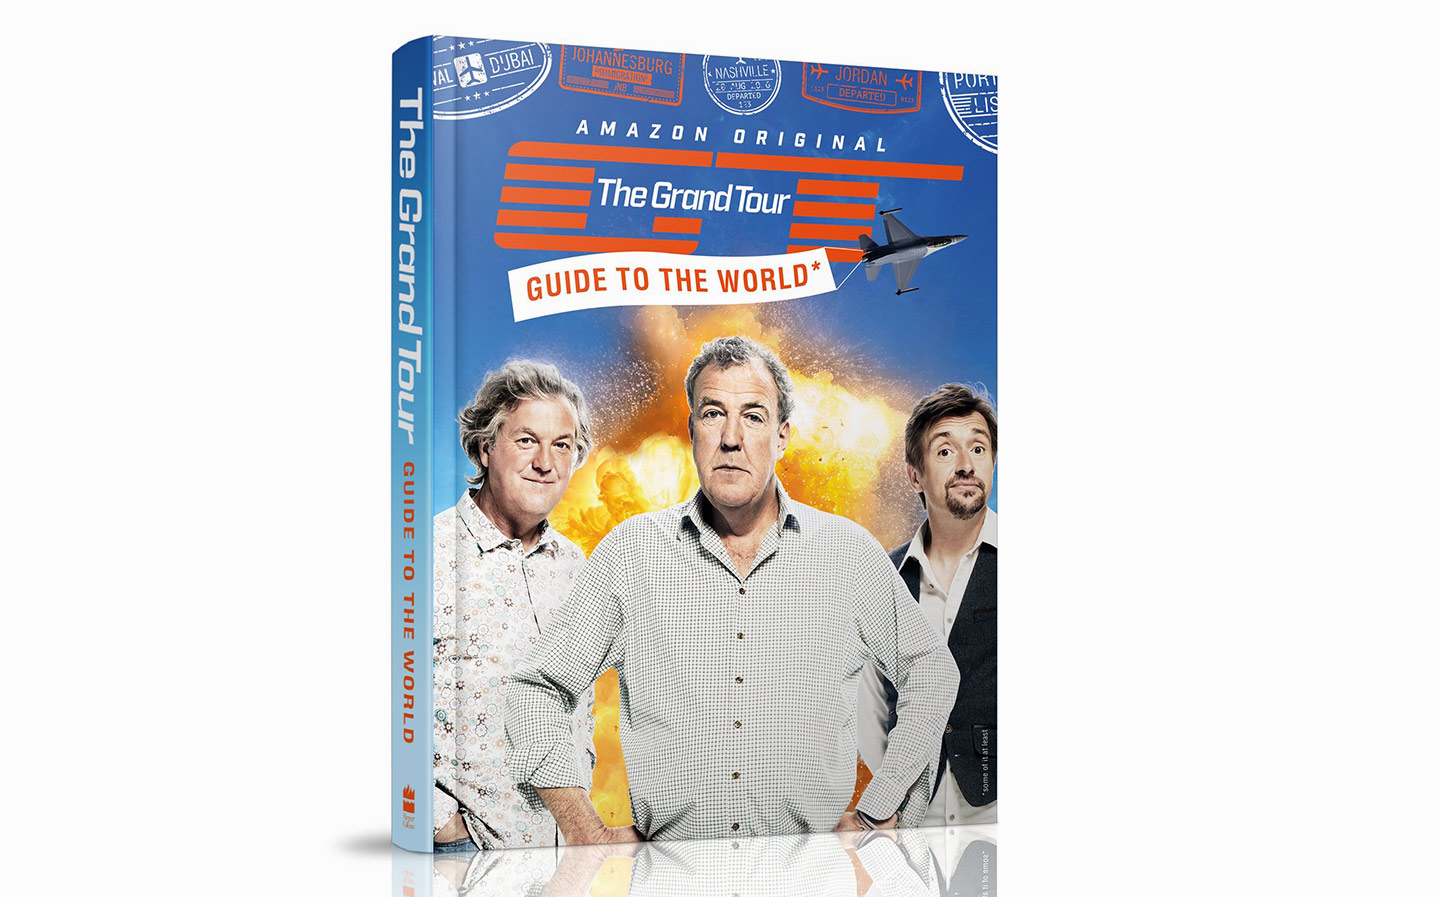 Laughs, insight and nonsense: The Grand Tour Guide to the World book review